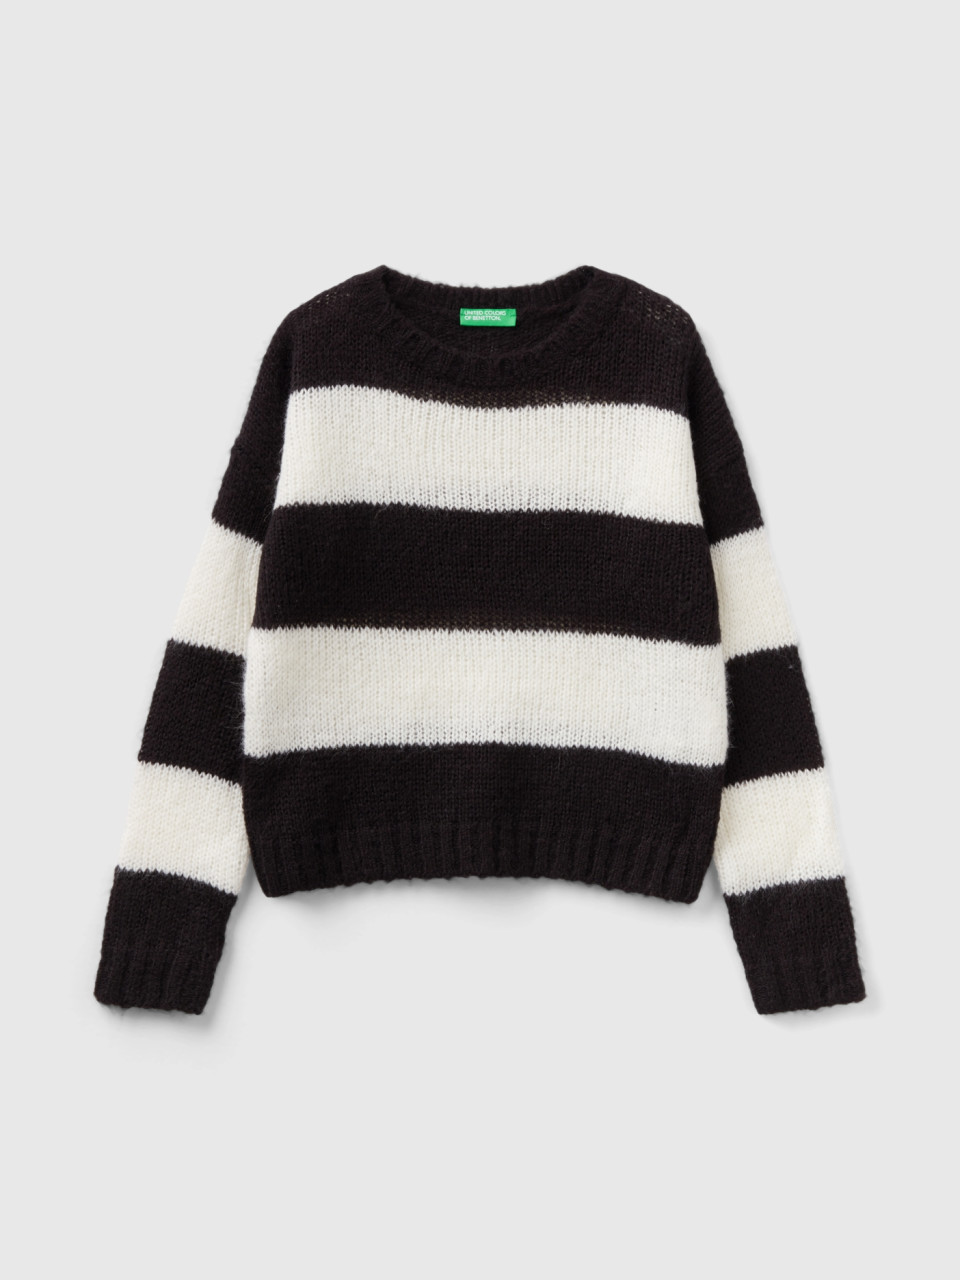 Benetton, Sweater With Two-tone Stripes, Black, Kids